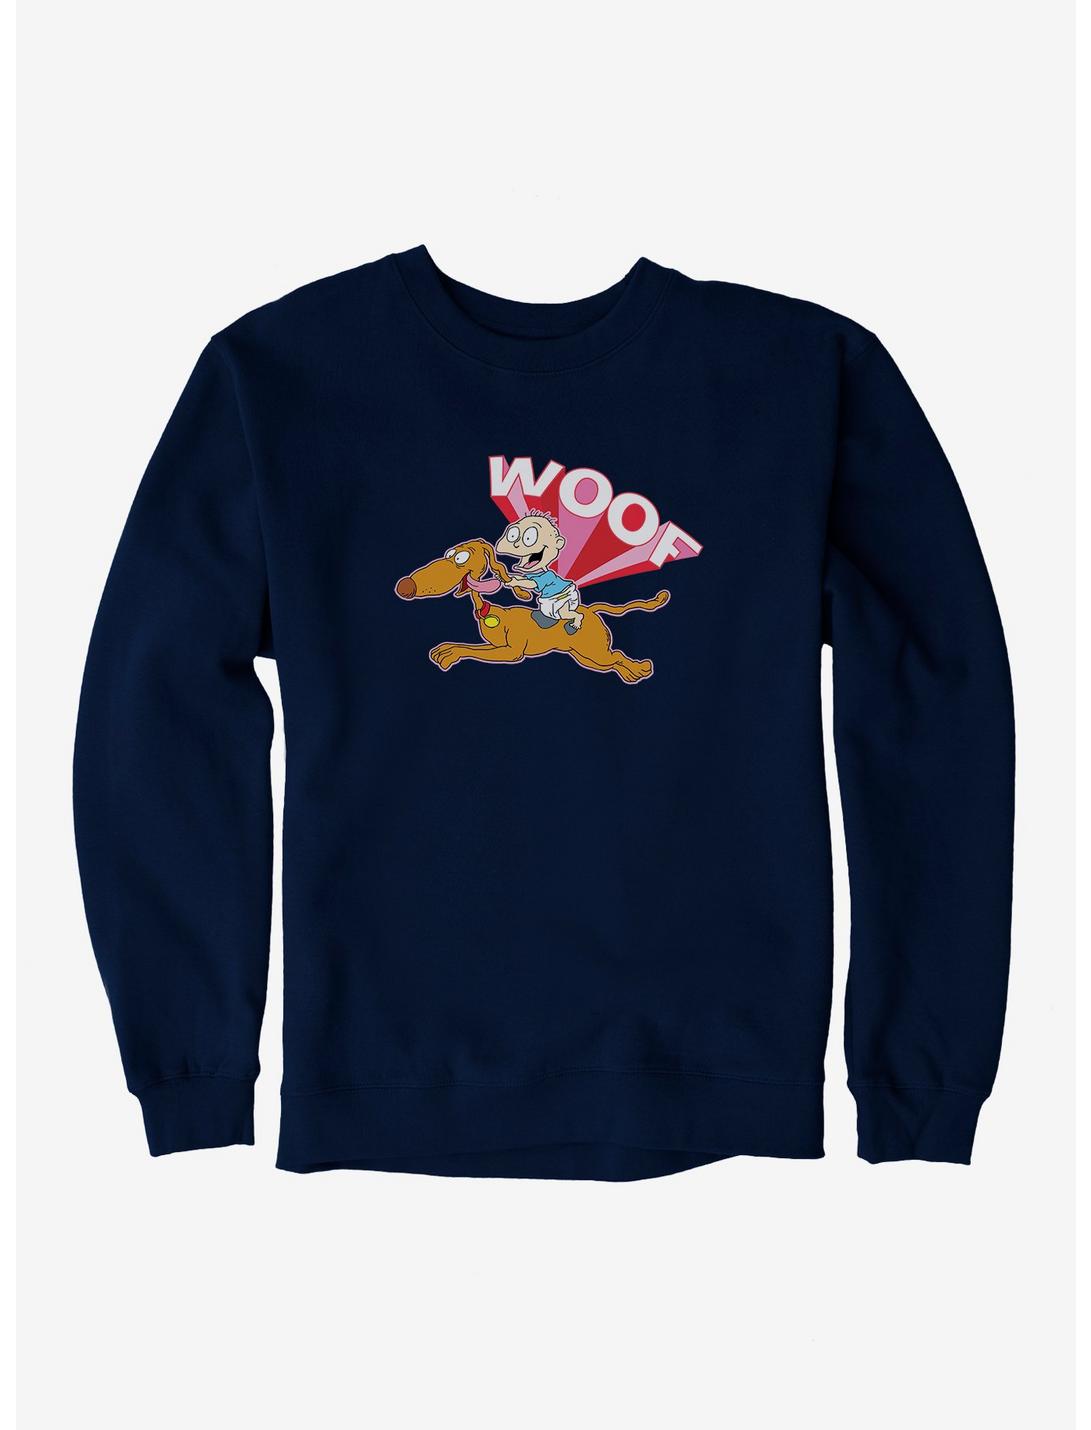 Rugrats Spike And Tommy Woof Sweatshirt, , hi-res